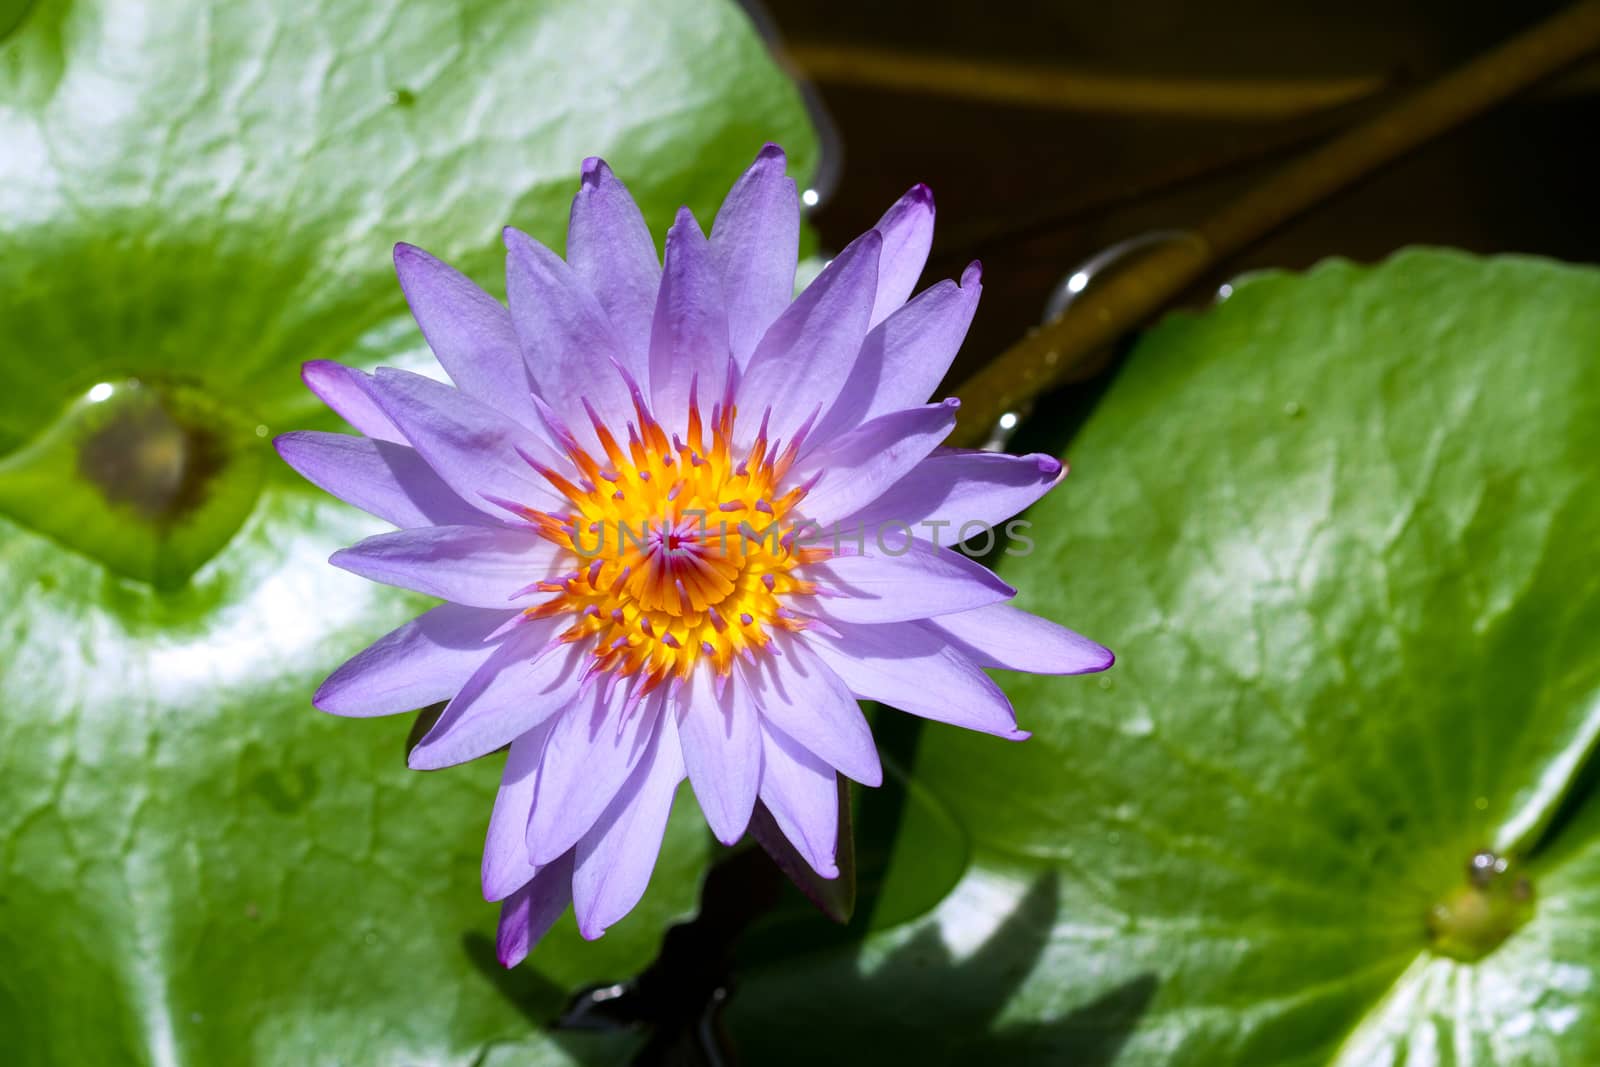 Blue lotus on the pond by jee1999